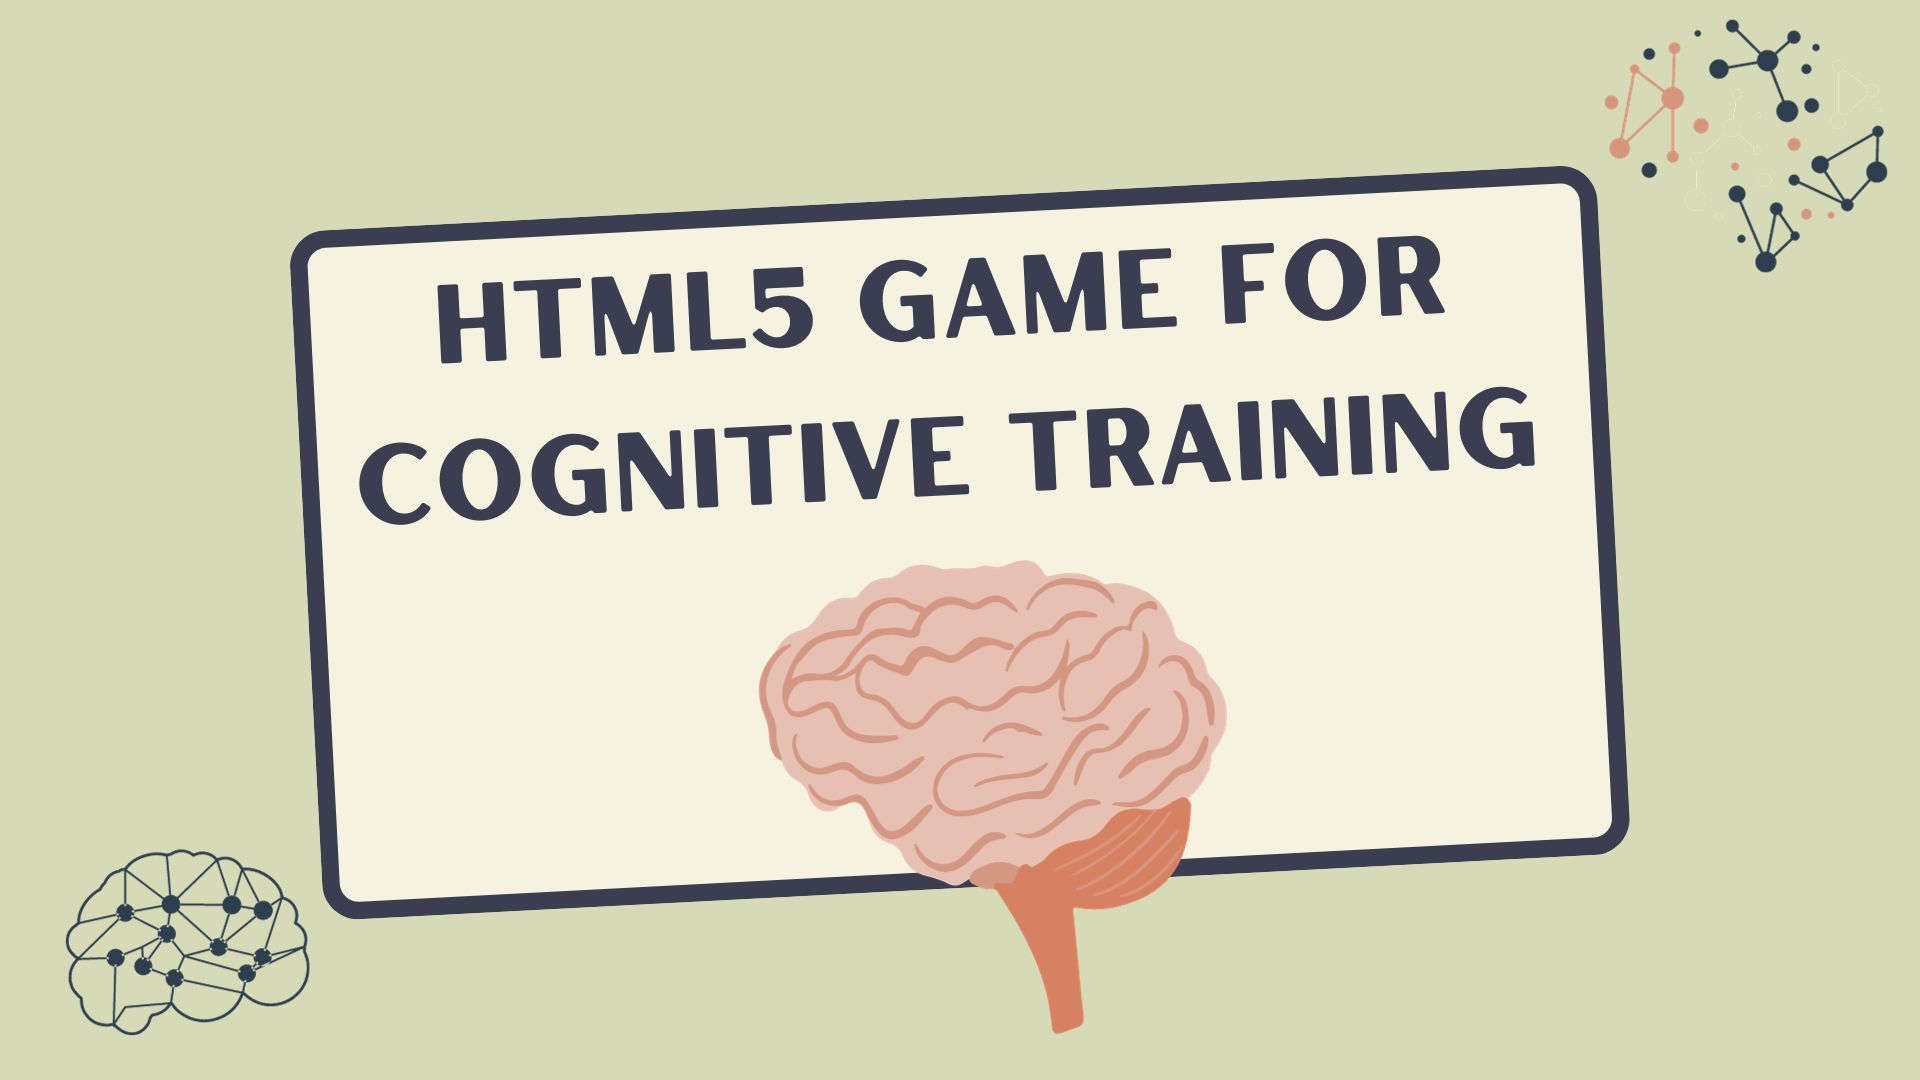 HTML5 Game for Cognitive Training